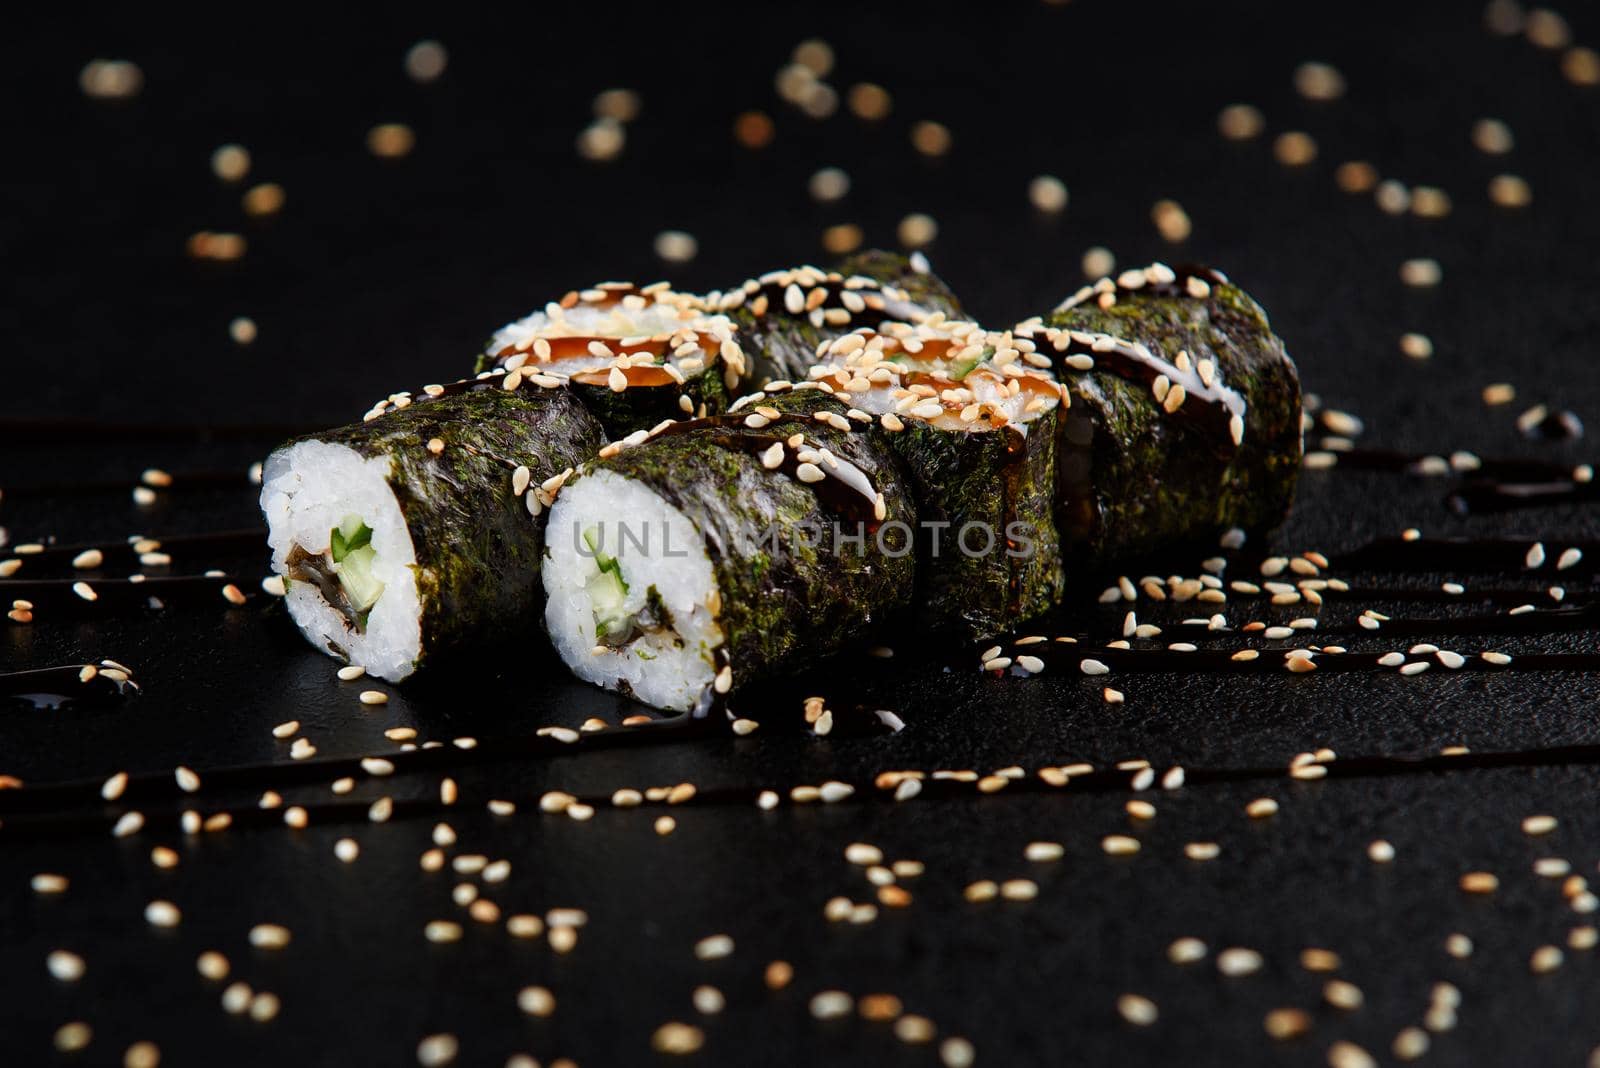 Sushi roll sea food on black background. Sushi delivery from the restaurant. Fresh delicious Japanese sushi with avocado, cucumber, shrimp and caviar on dark background. by Rabizo